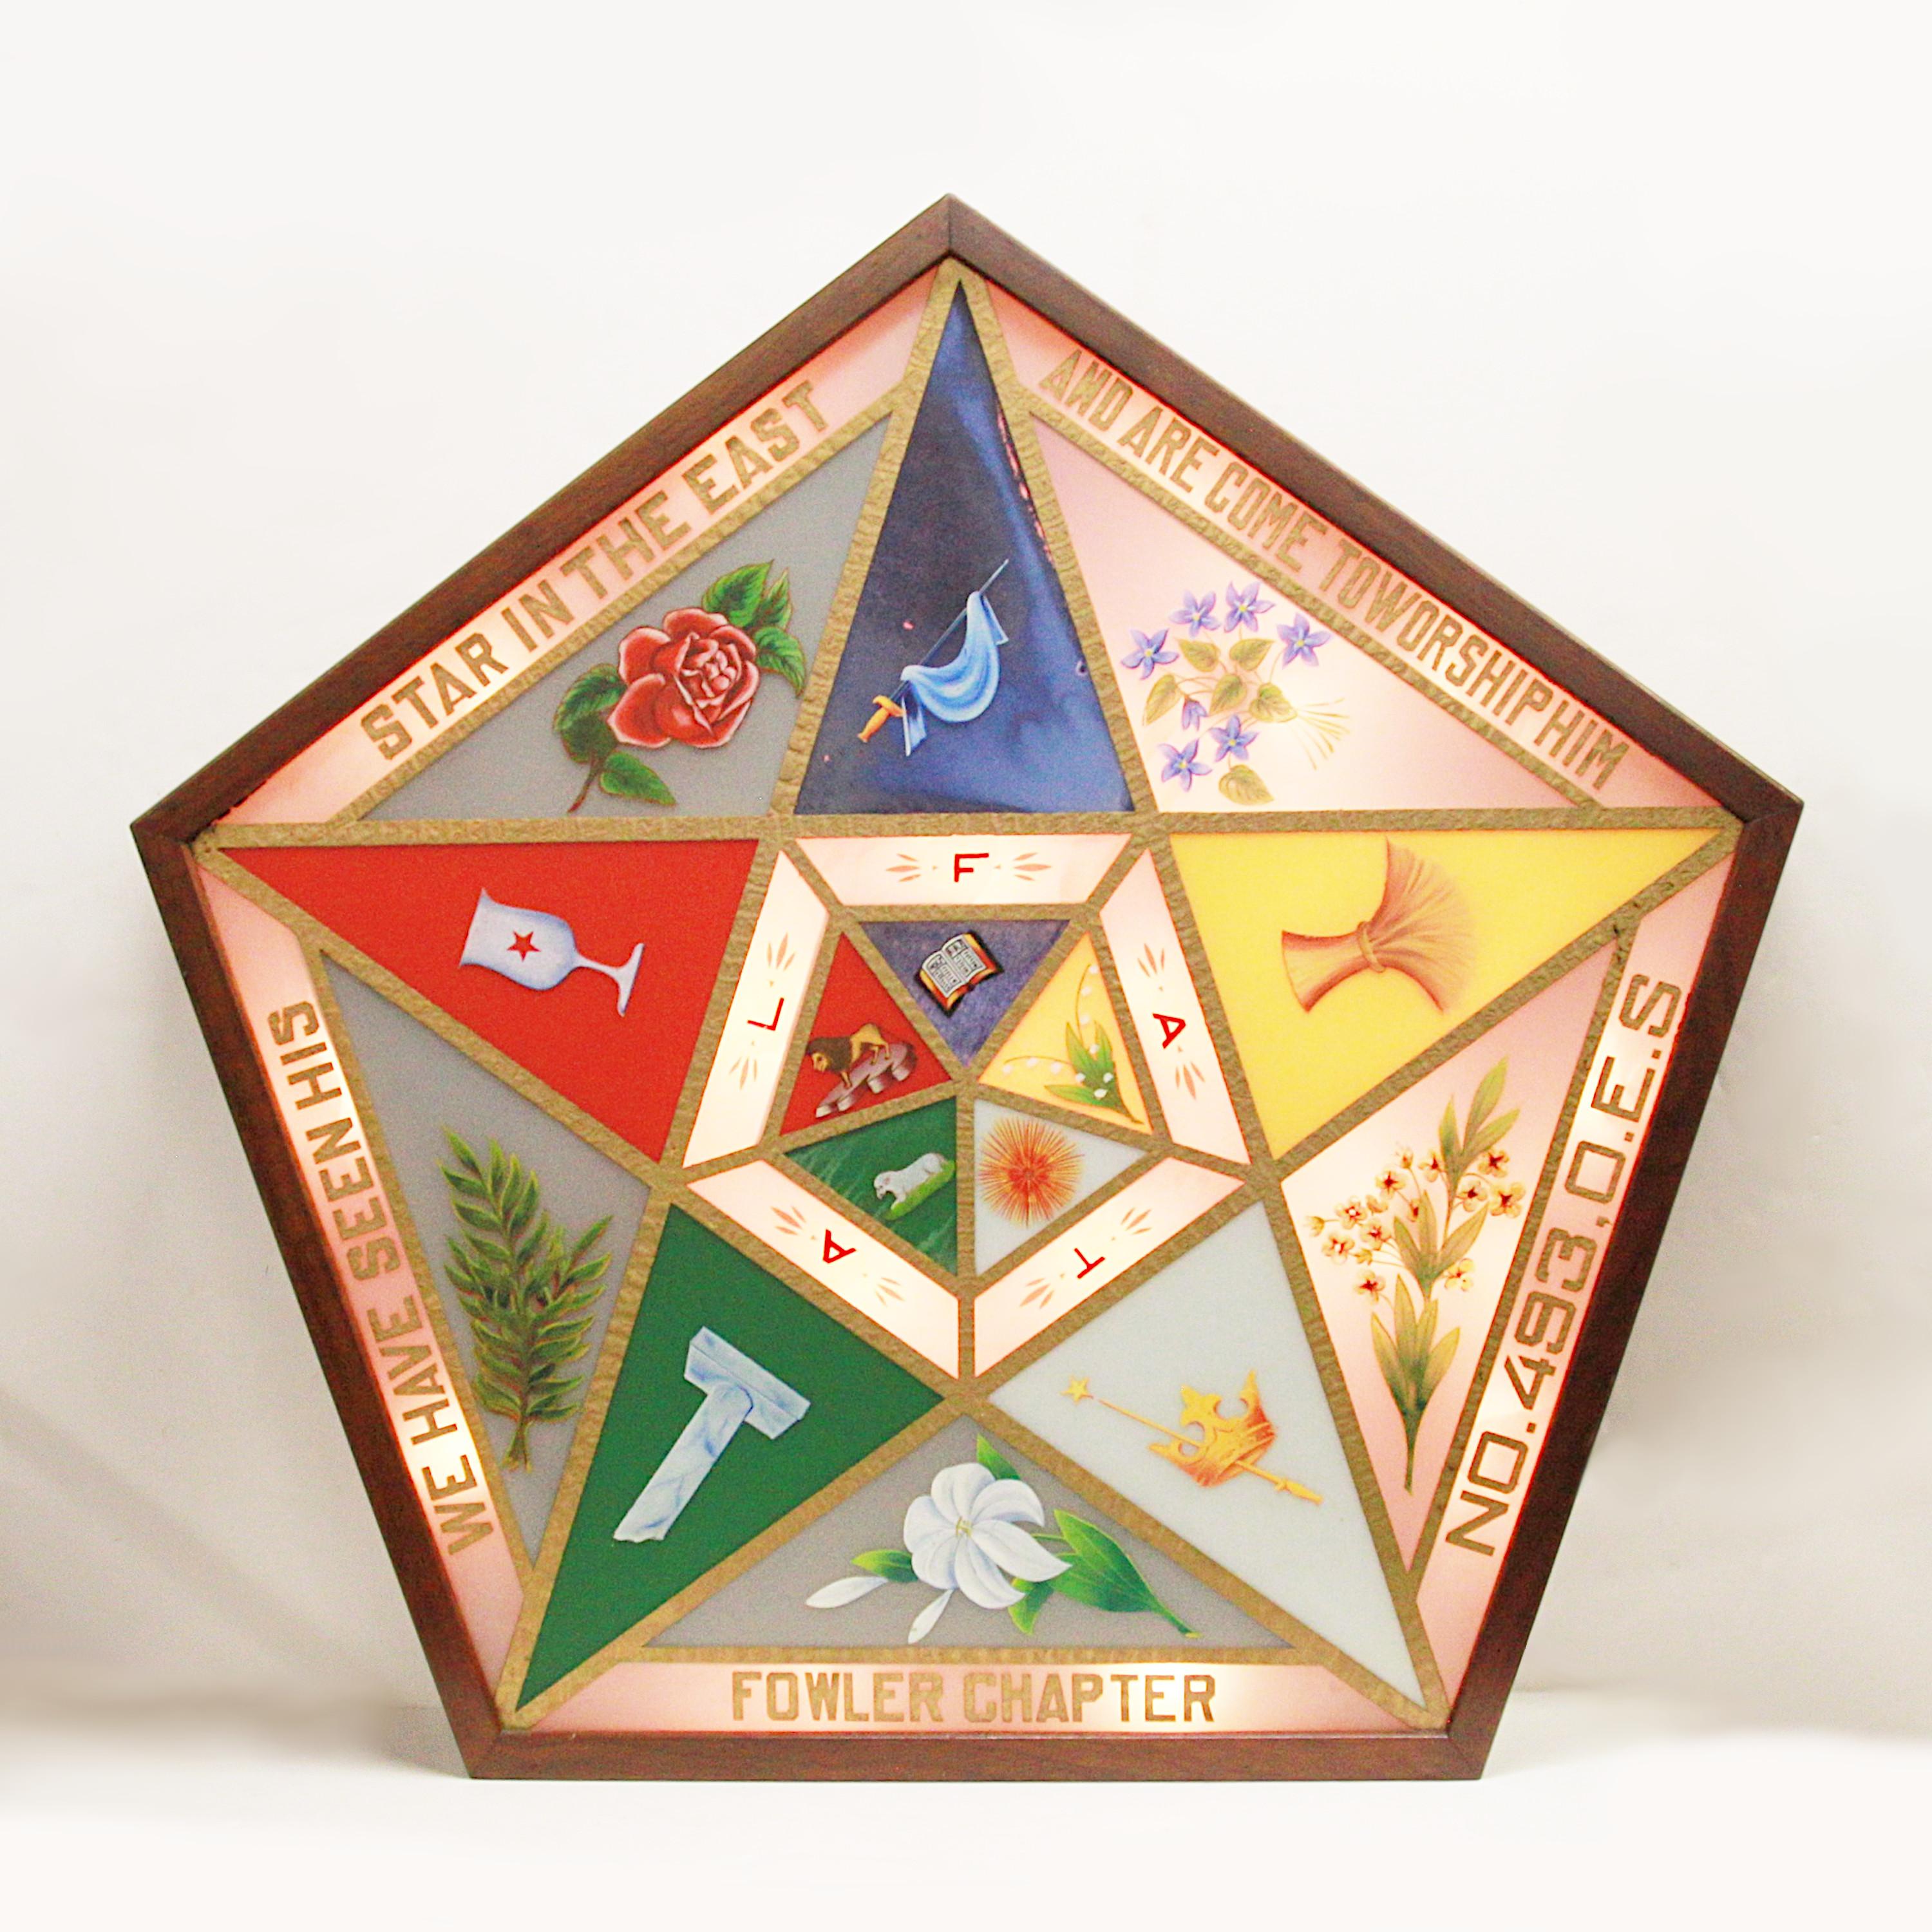 American Rare Vintage 1930s Order of the Eastern Star Light-Up Masonic Lodge Signet Sign For Sale